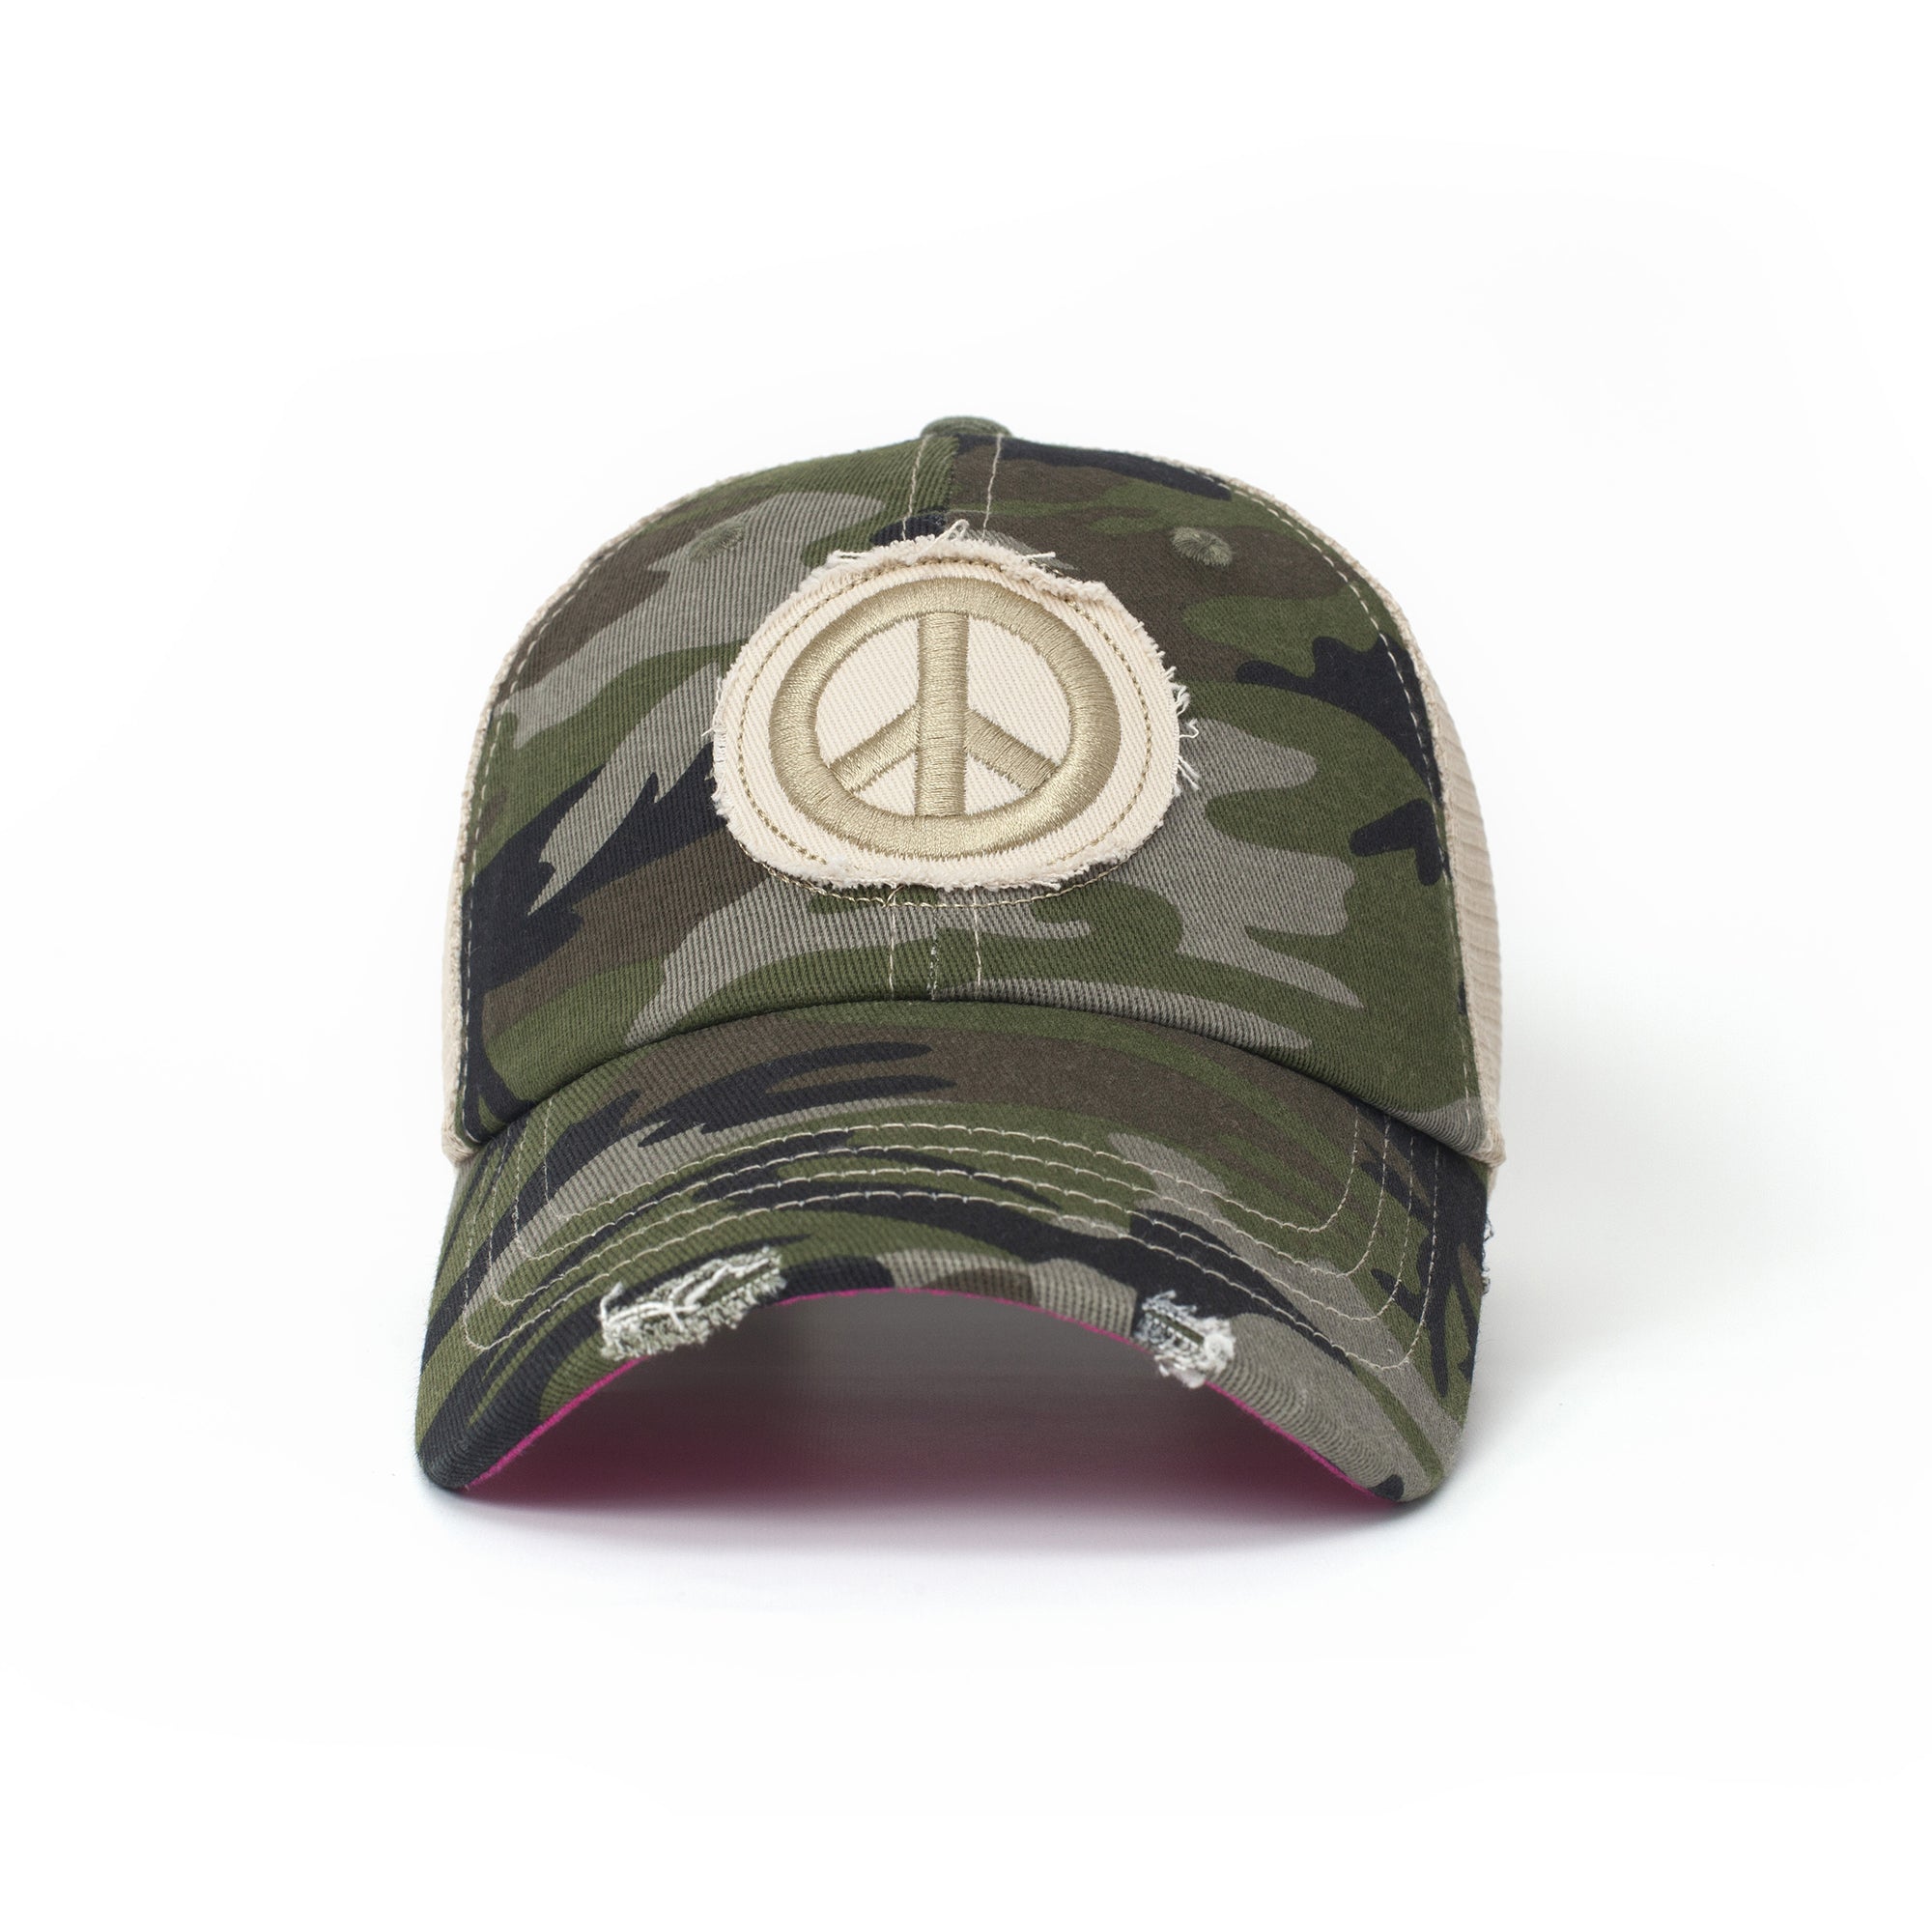 Women’s Hats, Women’s Trucker Hats, Trucker Hats, Hats, Adjustable Hats, Everyday Use, Comfortable, Camouflage, Peace Sign, Peaceful, Pattern